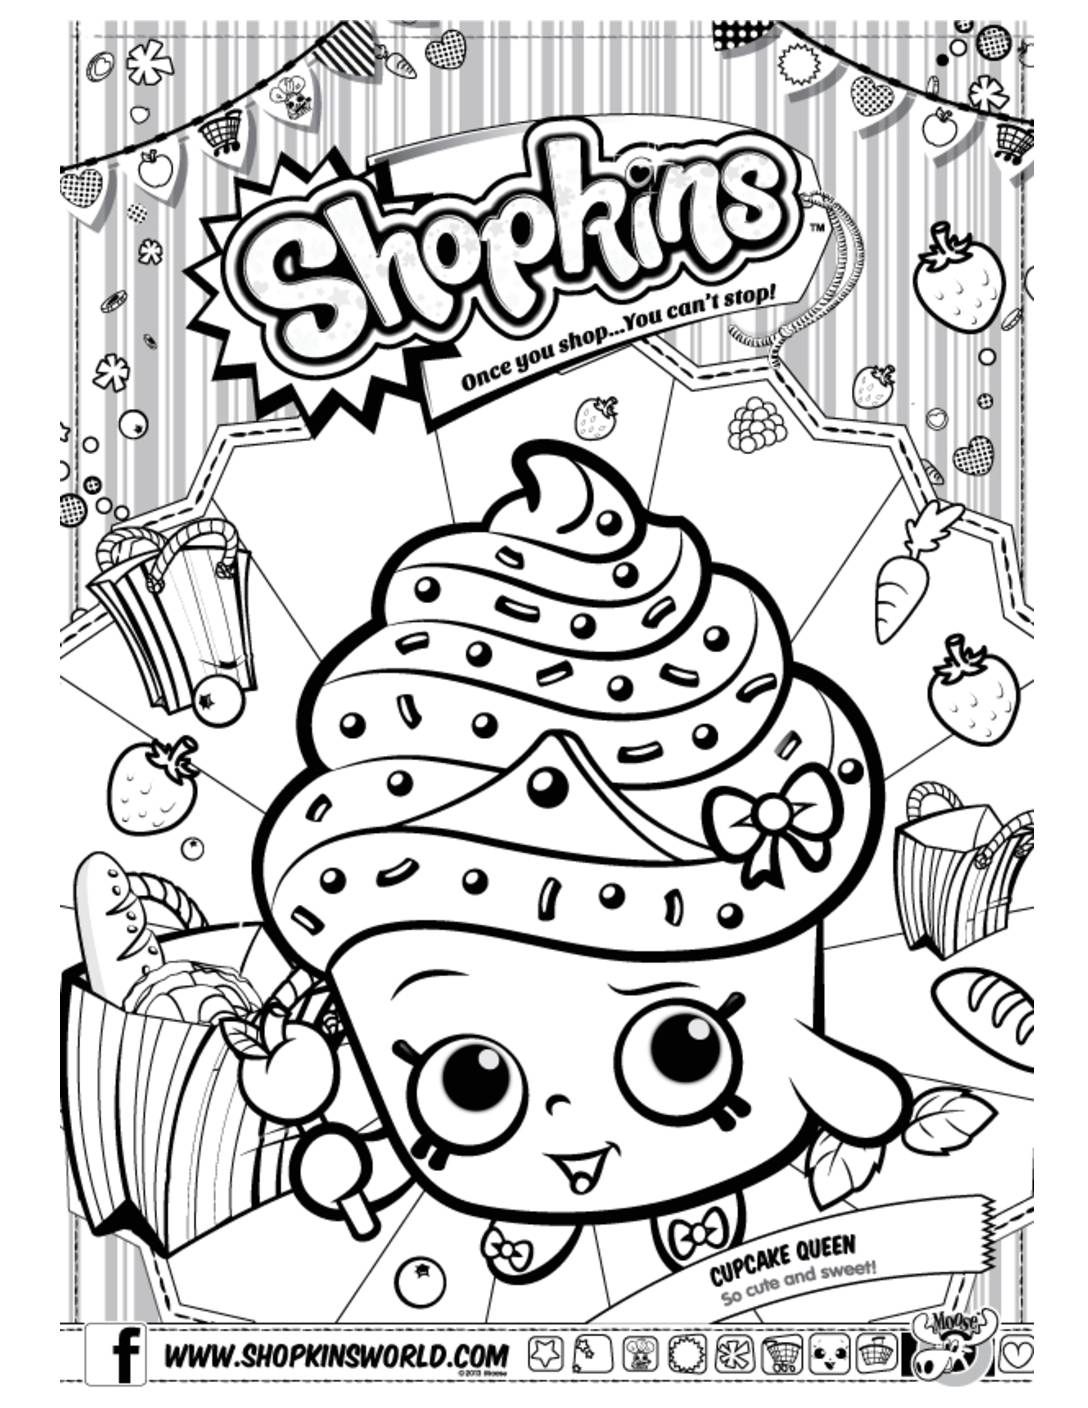 Shopkins Coloring Page 21